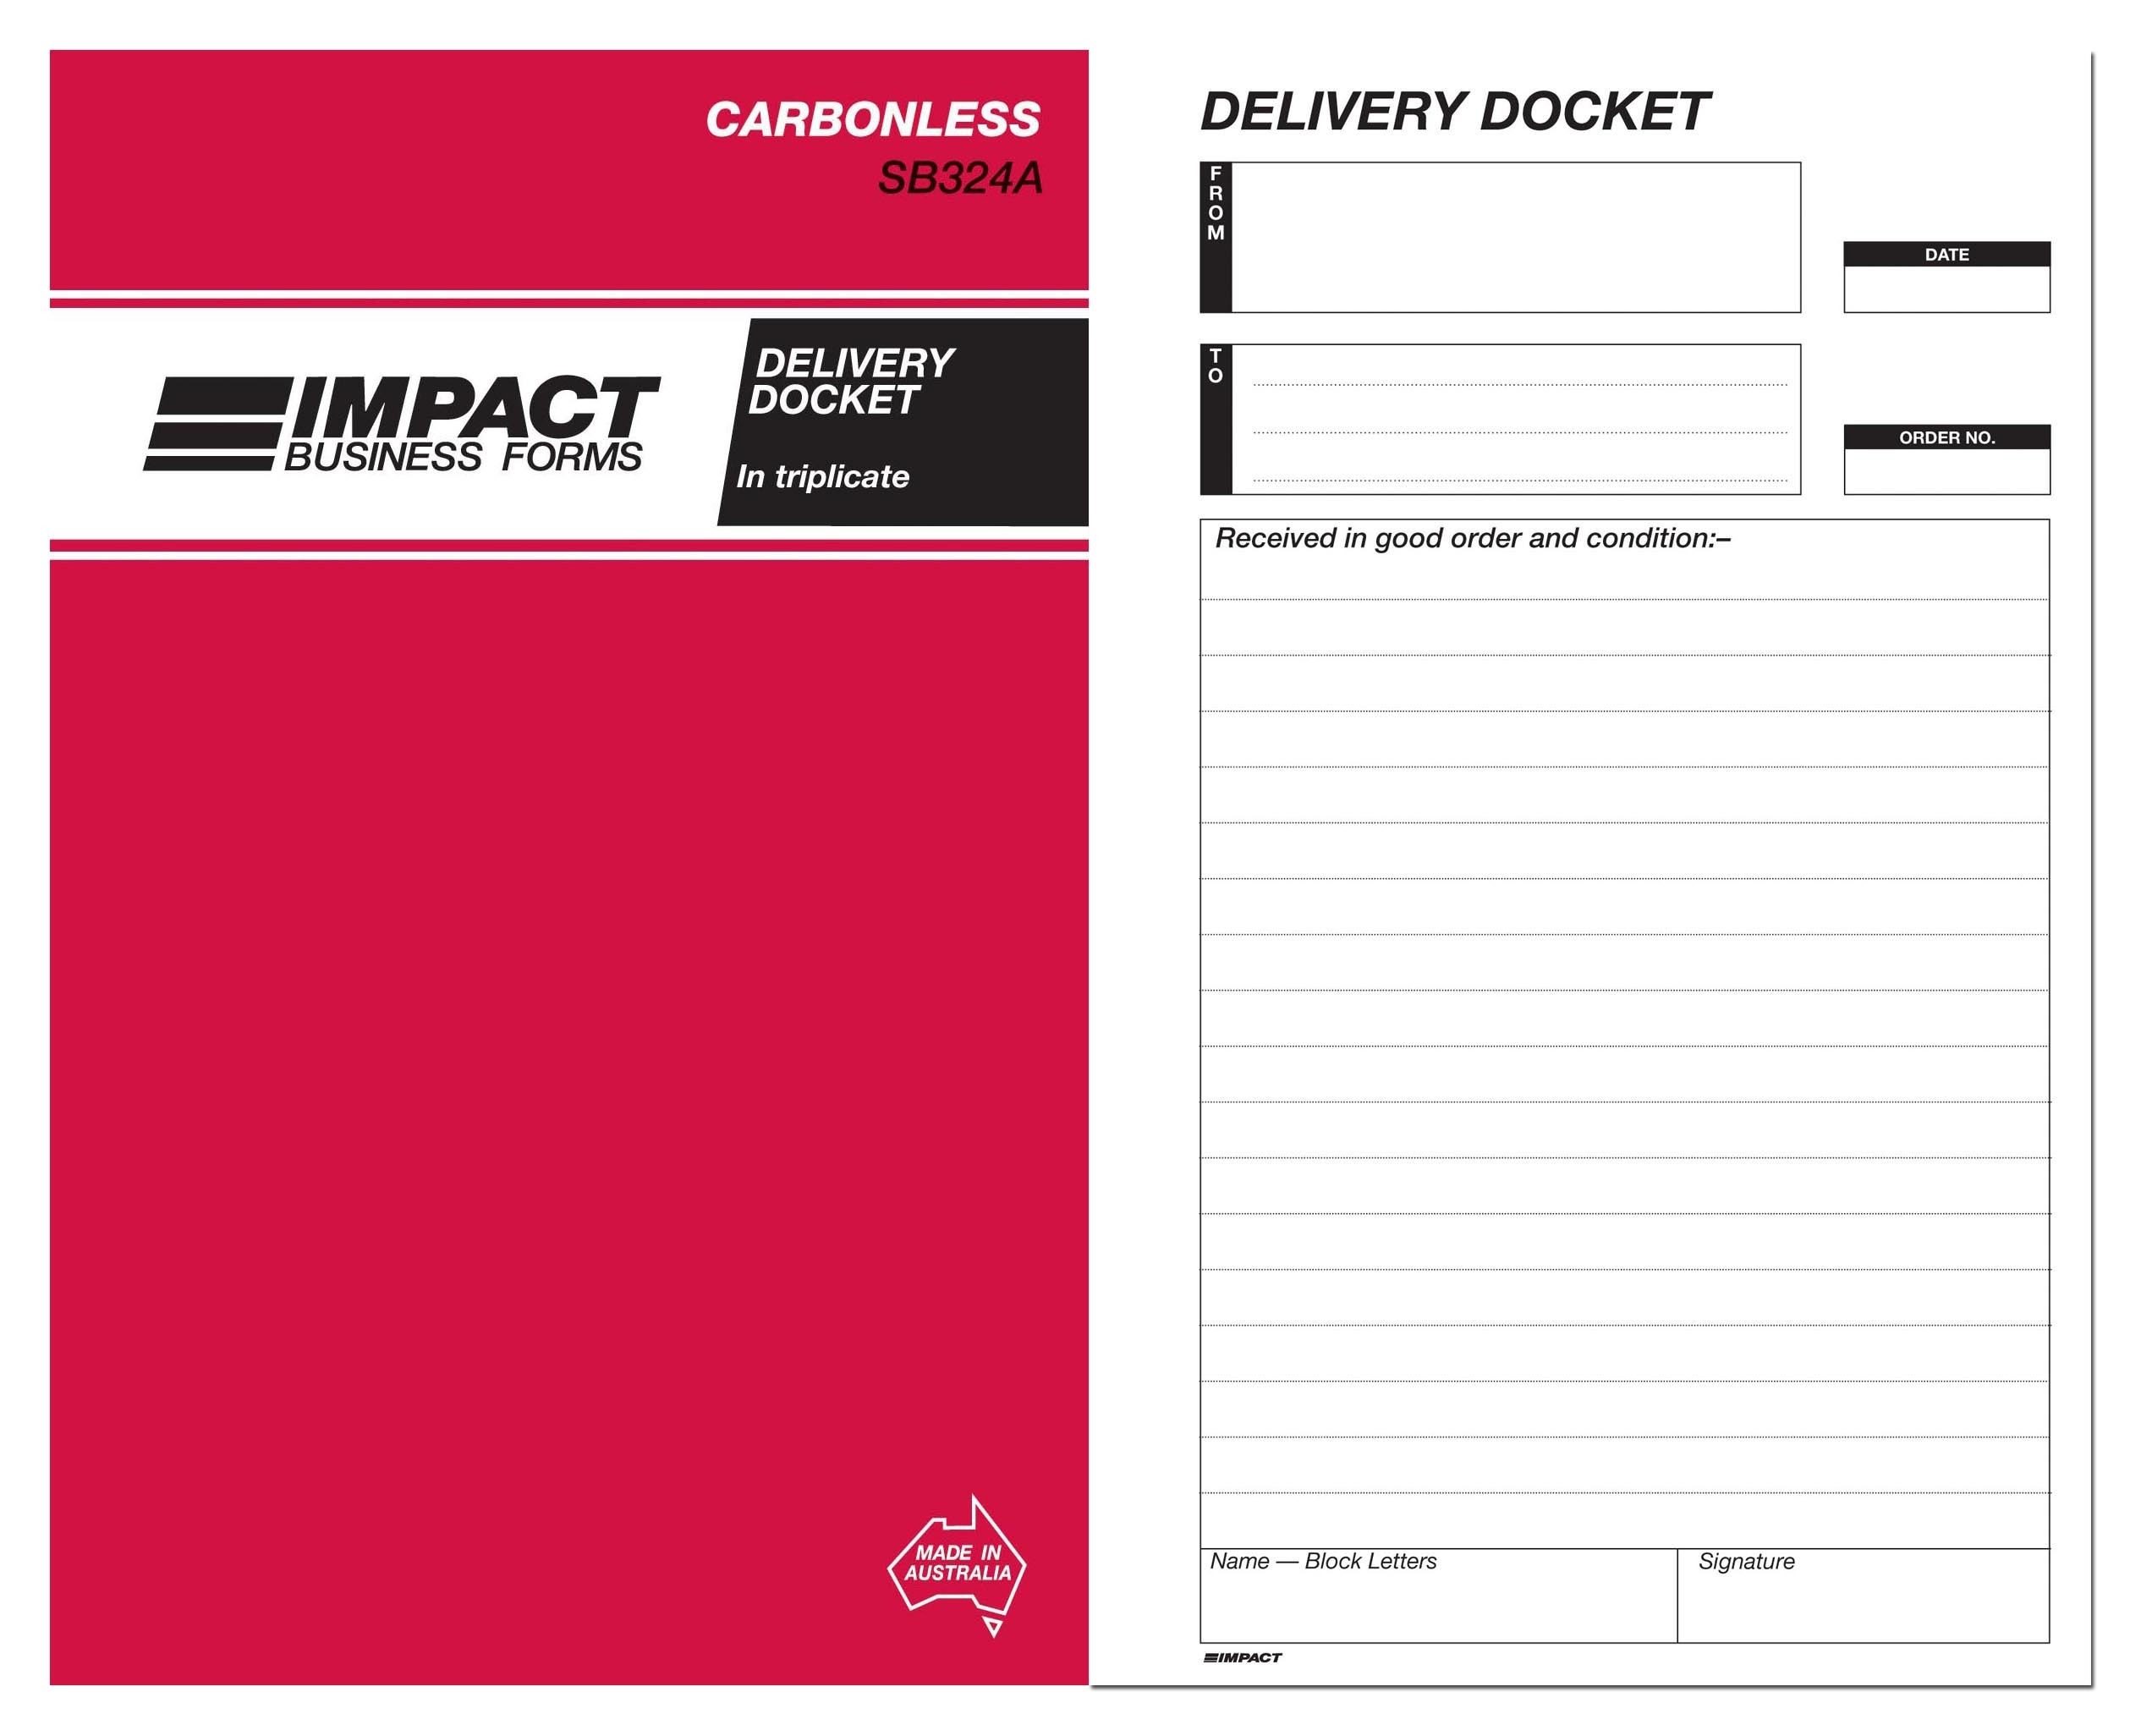 IMPACT CARBONLESS DELIVERY BOOK TRIP. (8x5) SB-324A (price excludes gst)